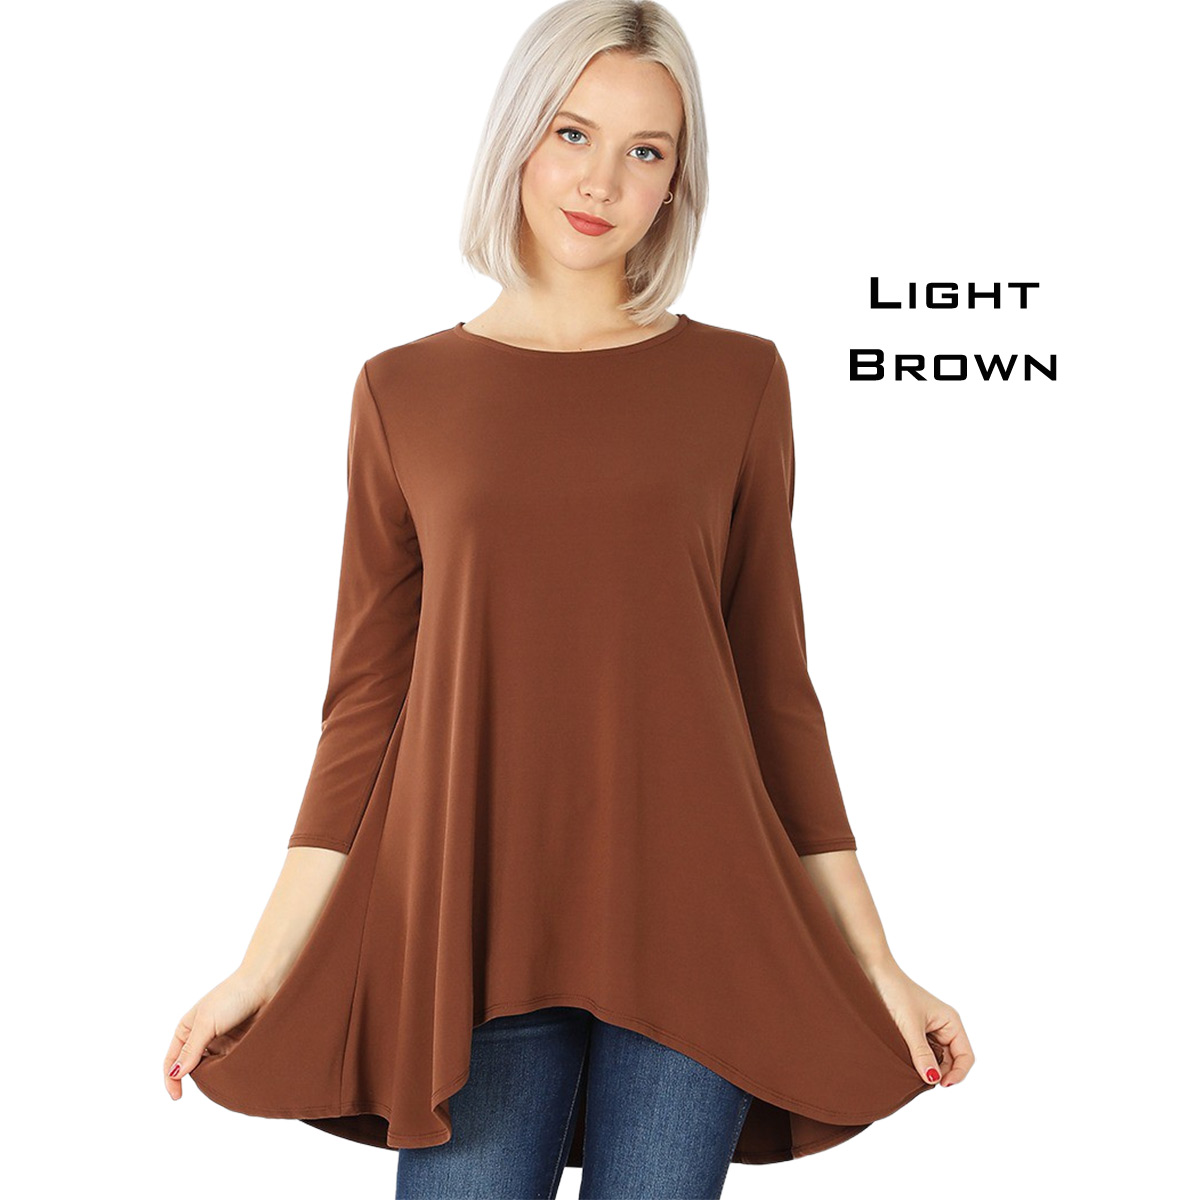 2367 - Ity High-Low 3/4 Sleeve Top LIGHT BROWN Ity High-Low 3/4 Sleeve Top 2367 - X-Large